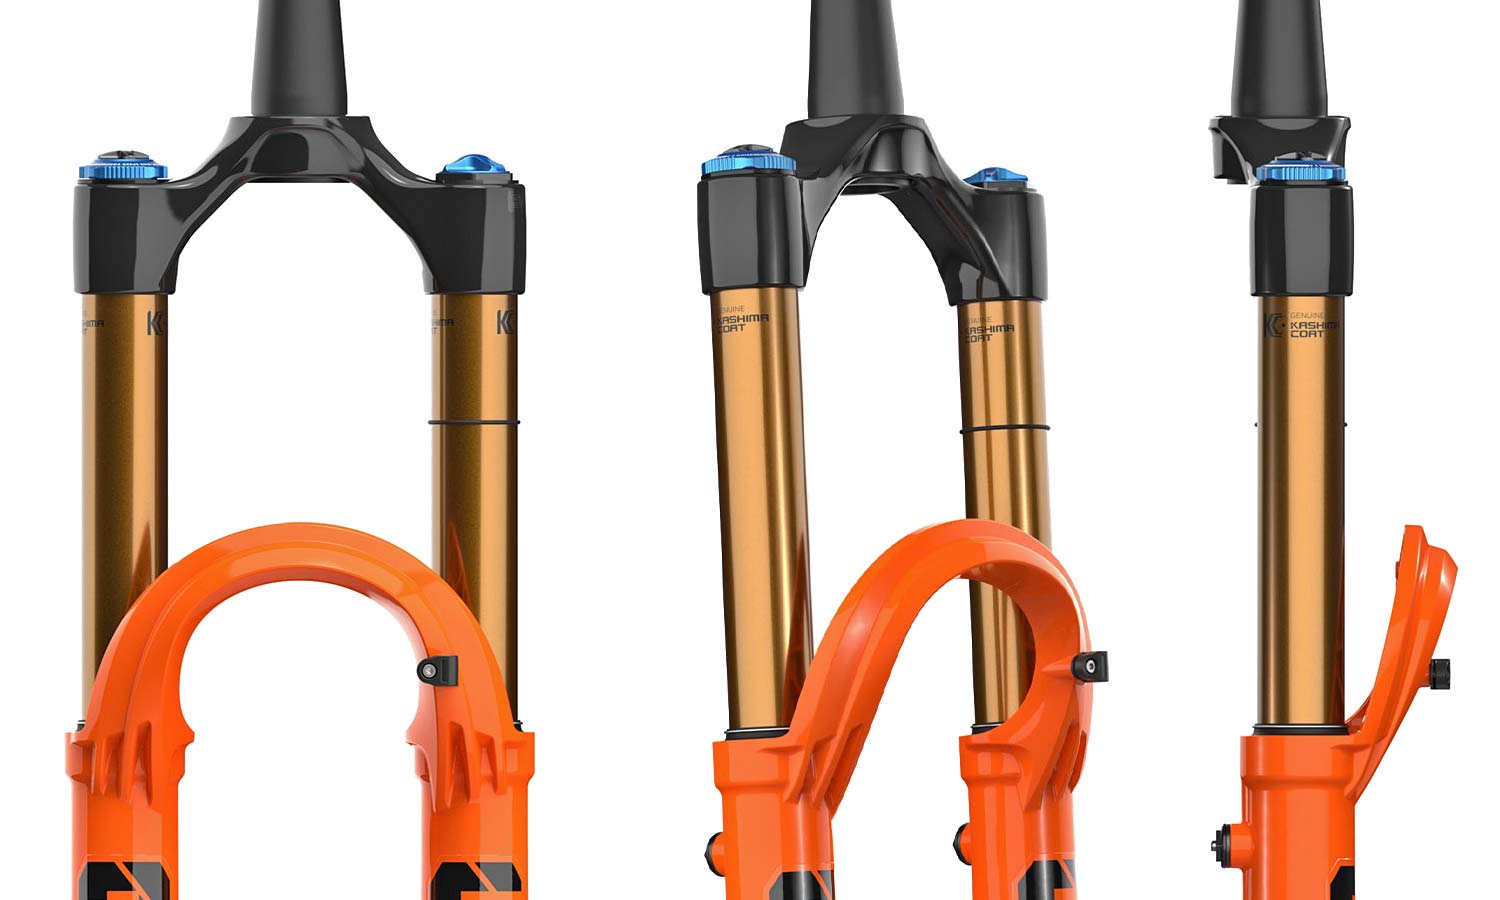 2023 updated FOX 36 fork, MY23 lighter stronger & more durable with new taller crown details